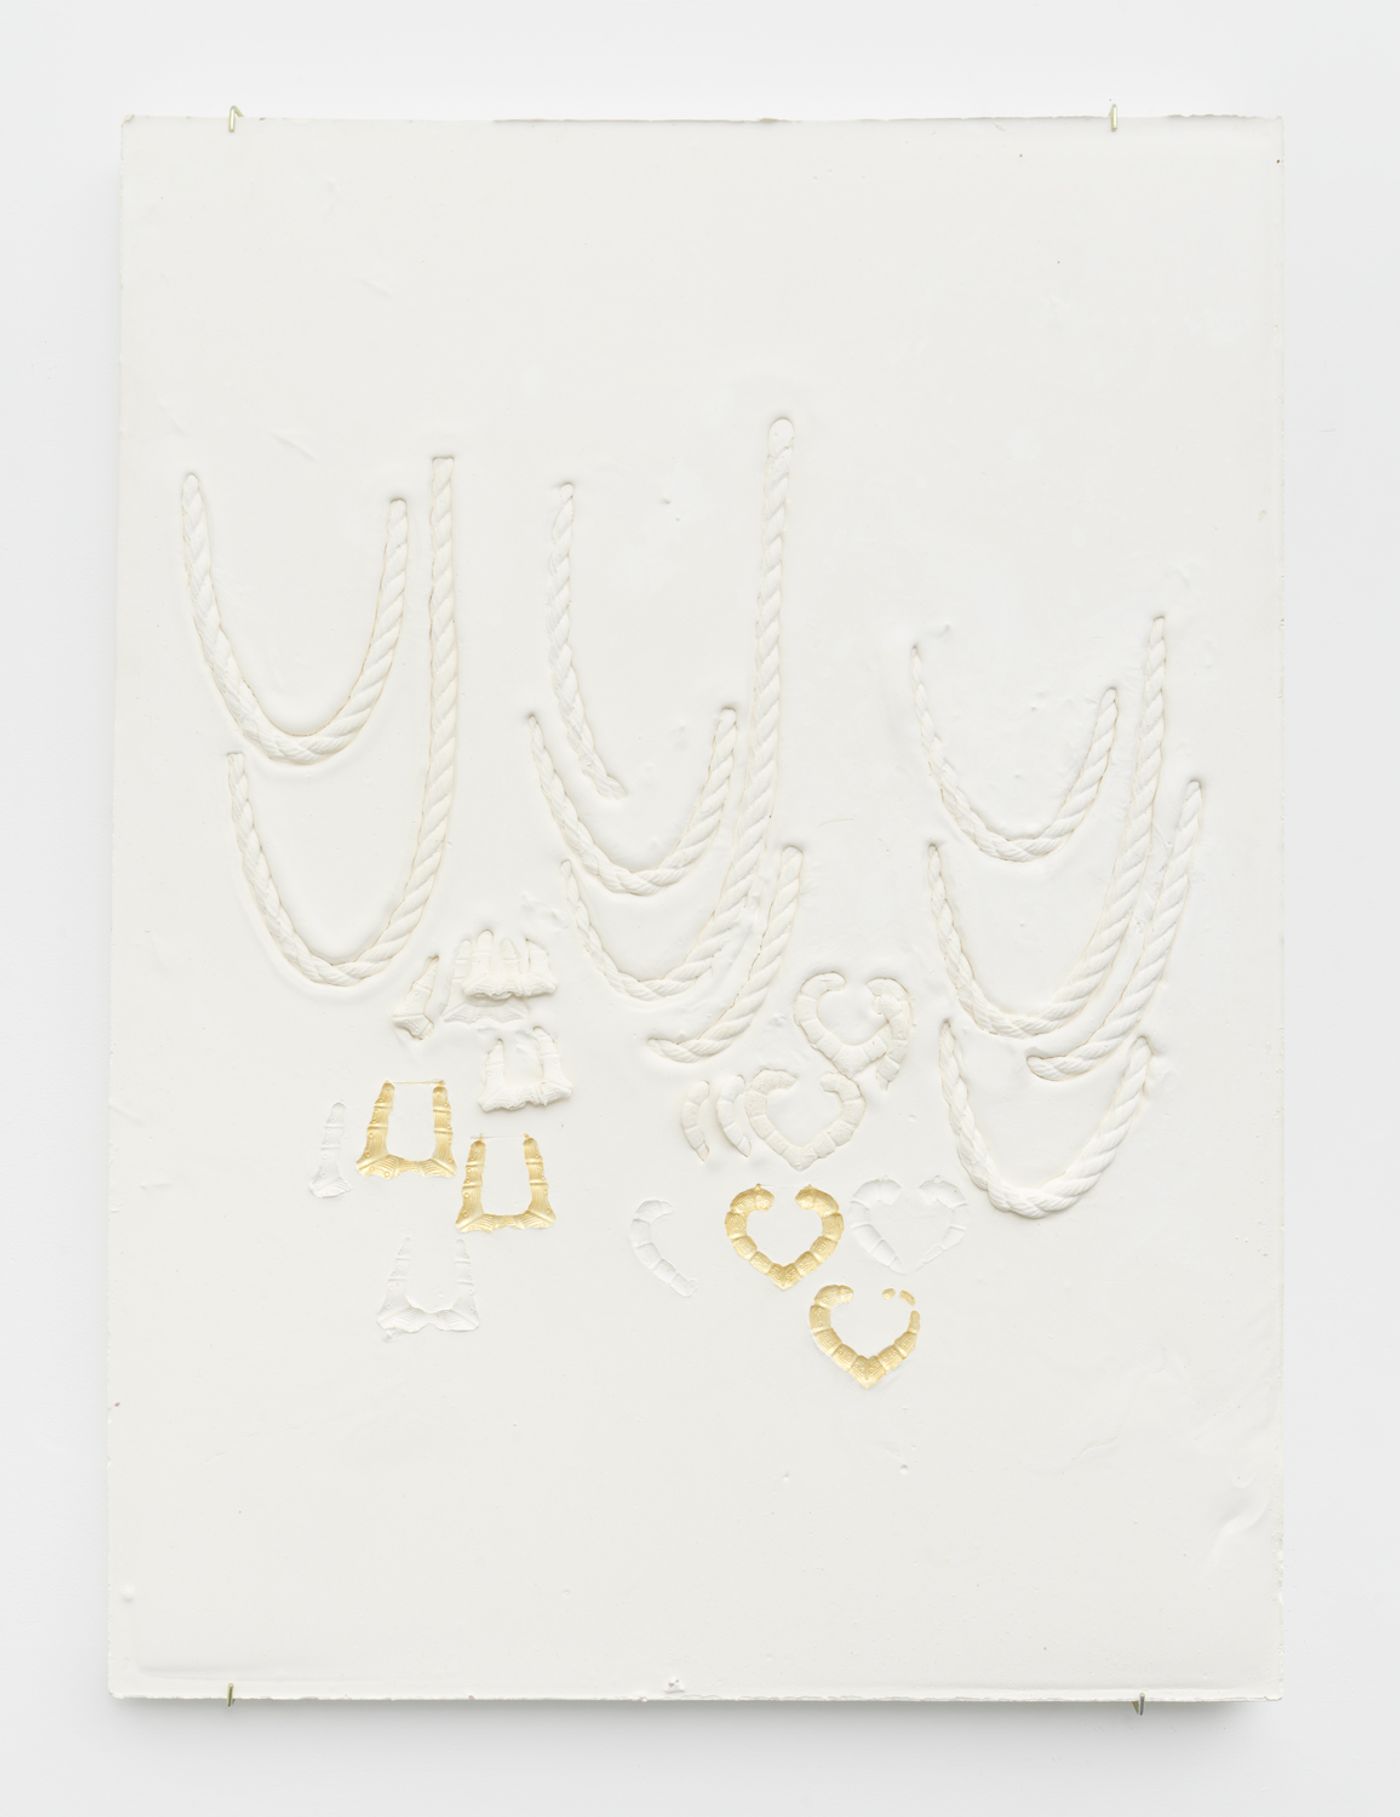 Image of Composition with Rope Chains Overlapping Bamboo Earrings, Impressed with Gold, 2019: Plaster, foam, and acrylic